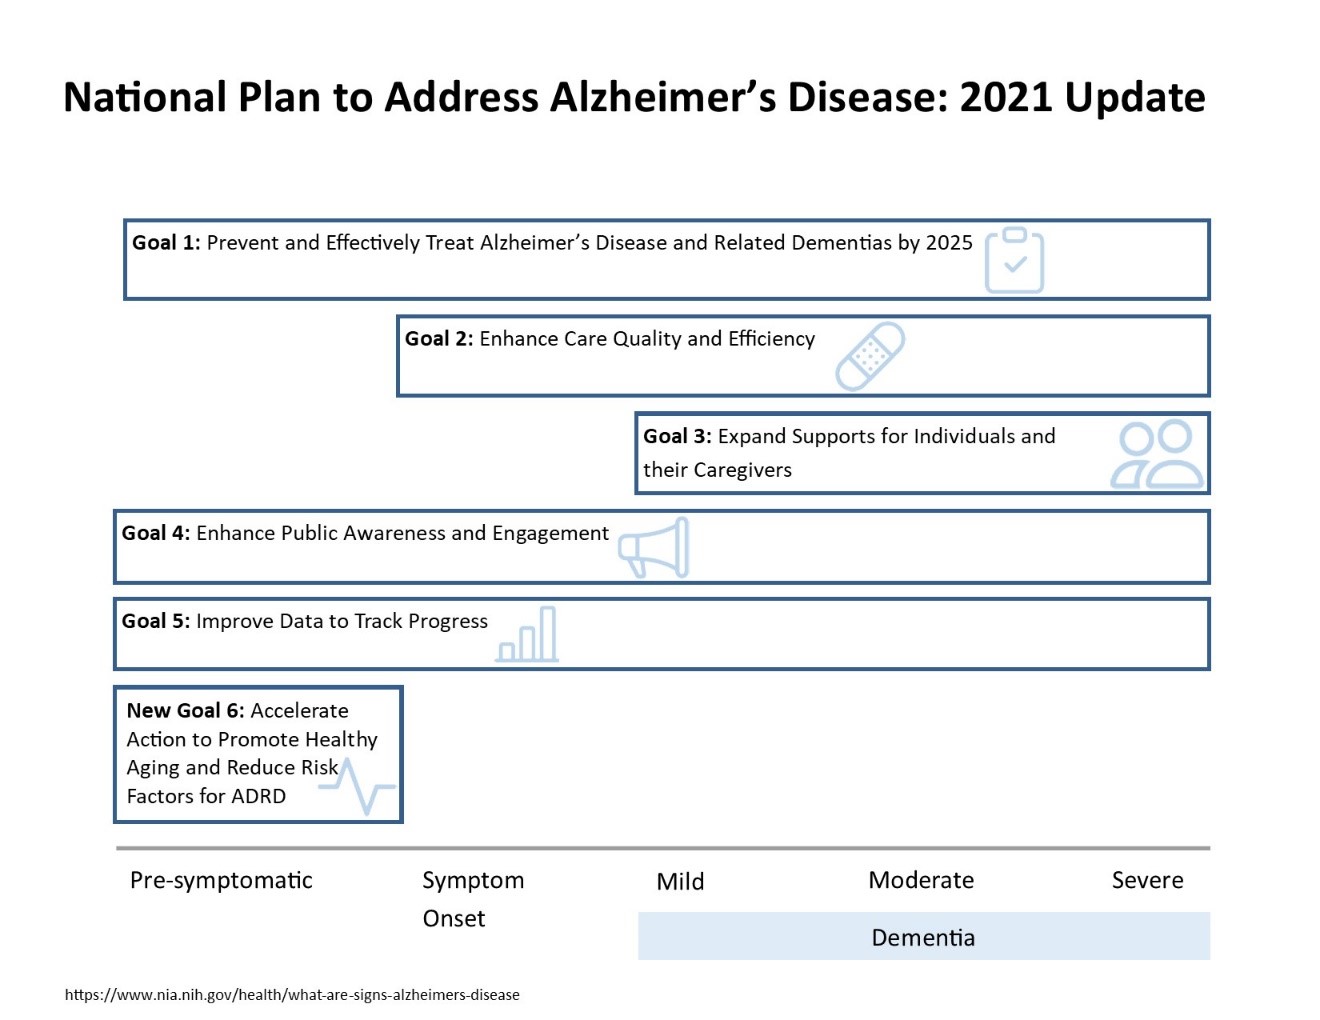 FIGURE 1 illustrates when the National Plan’s goals apply to the progression of the dementia. The progression of dementia on the x-axis is described as pre-symptomatic, symptom onset, mild dementia, moderate dementia, and severe dementia.